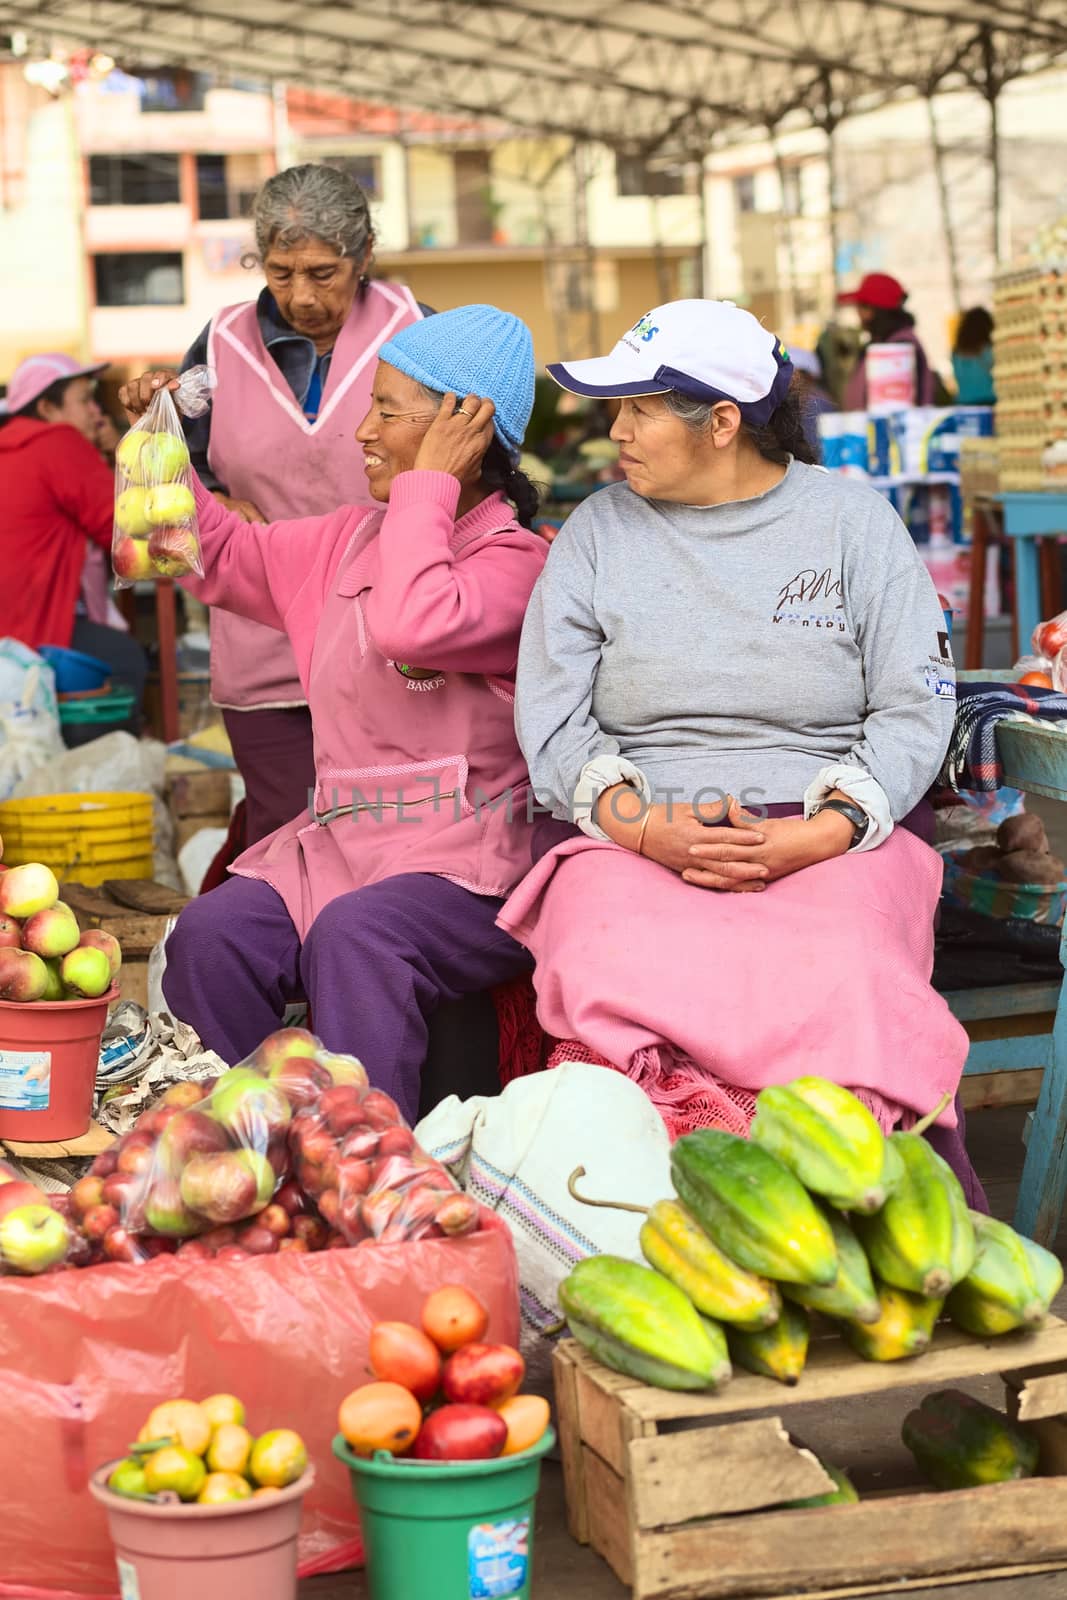 BANOS, ECUADOR - FEBRUARY 26, 2014: Unidentified female vendors on the market on Plaza 5 de Junio on February 26, 2014 in Banos, Ecuador. On the market, which is held every Wednesday, Friday and Sunday, mainly fruits and vegetables are being offered, with a few stands of dairy and meat products. 